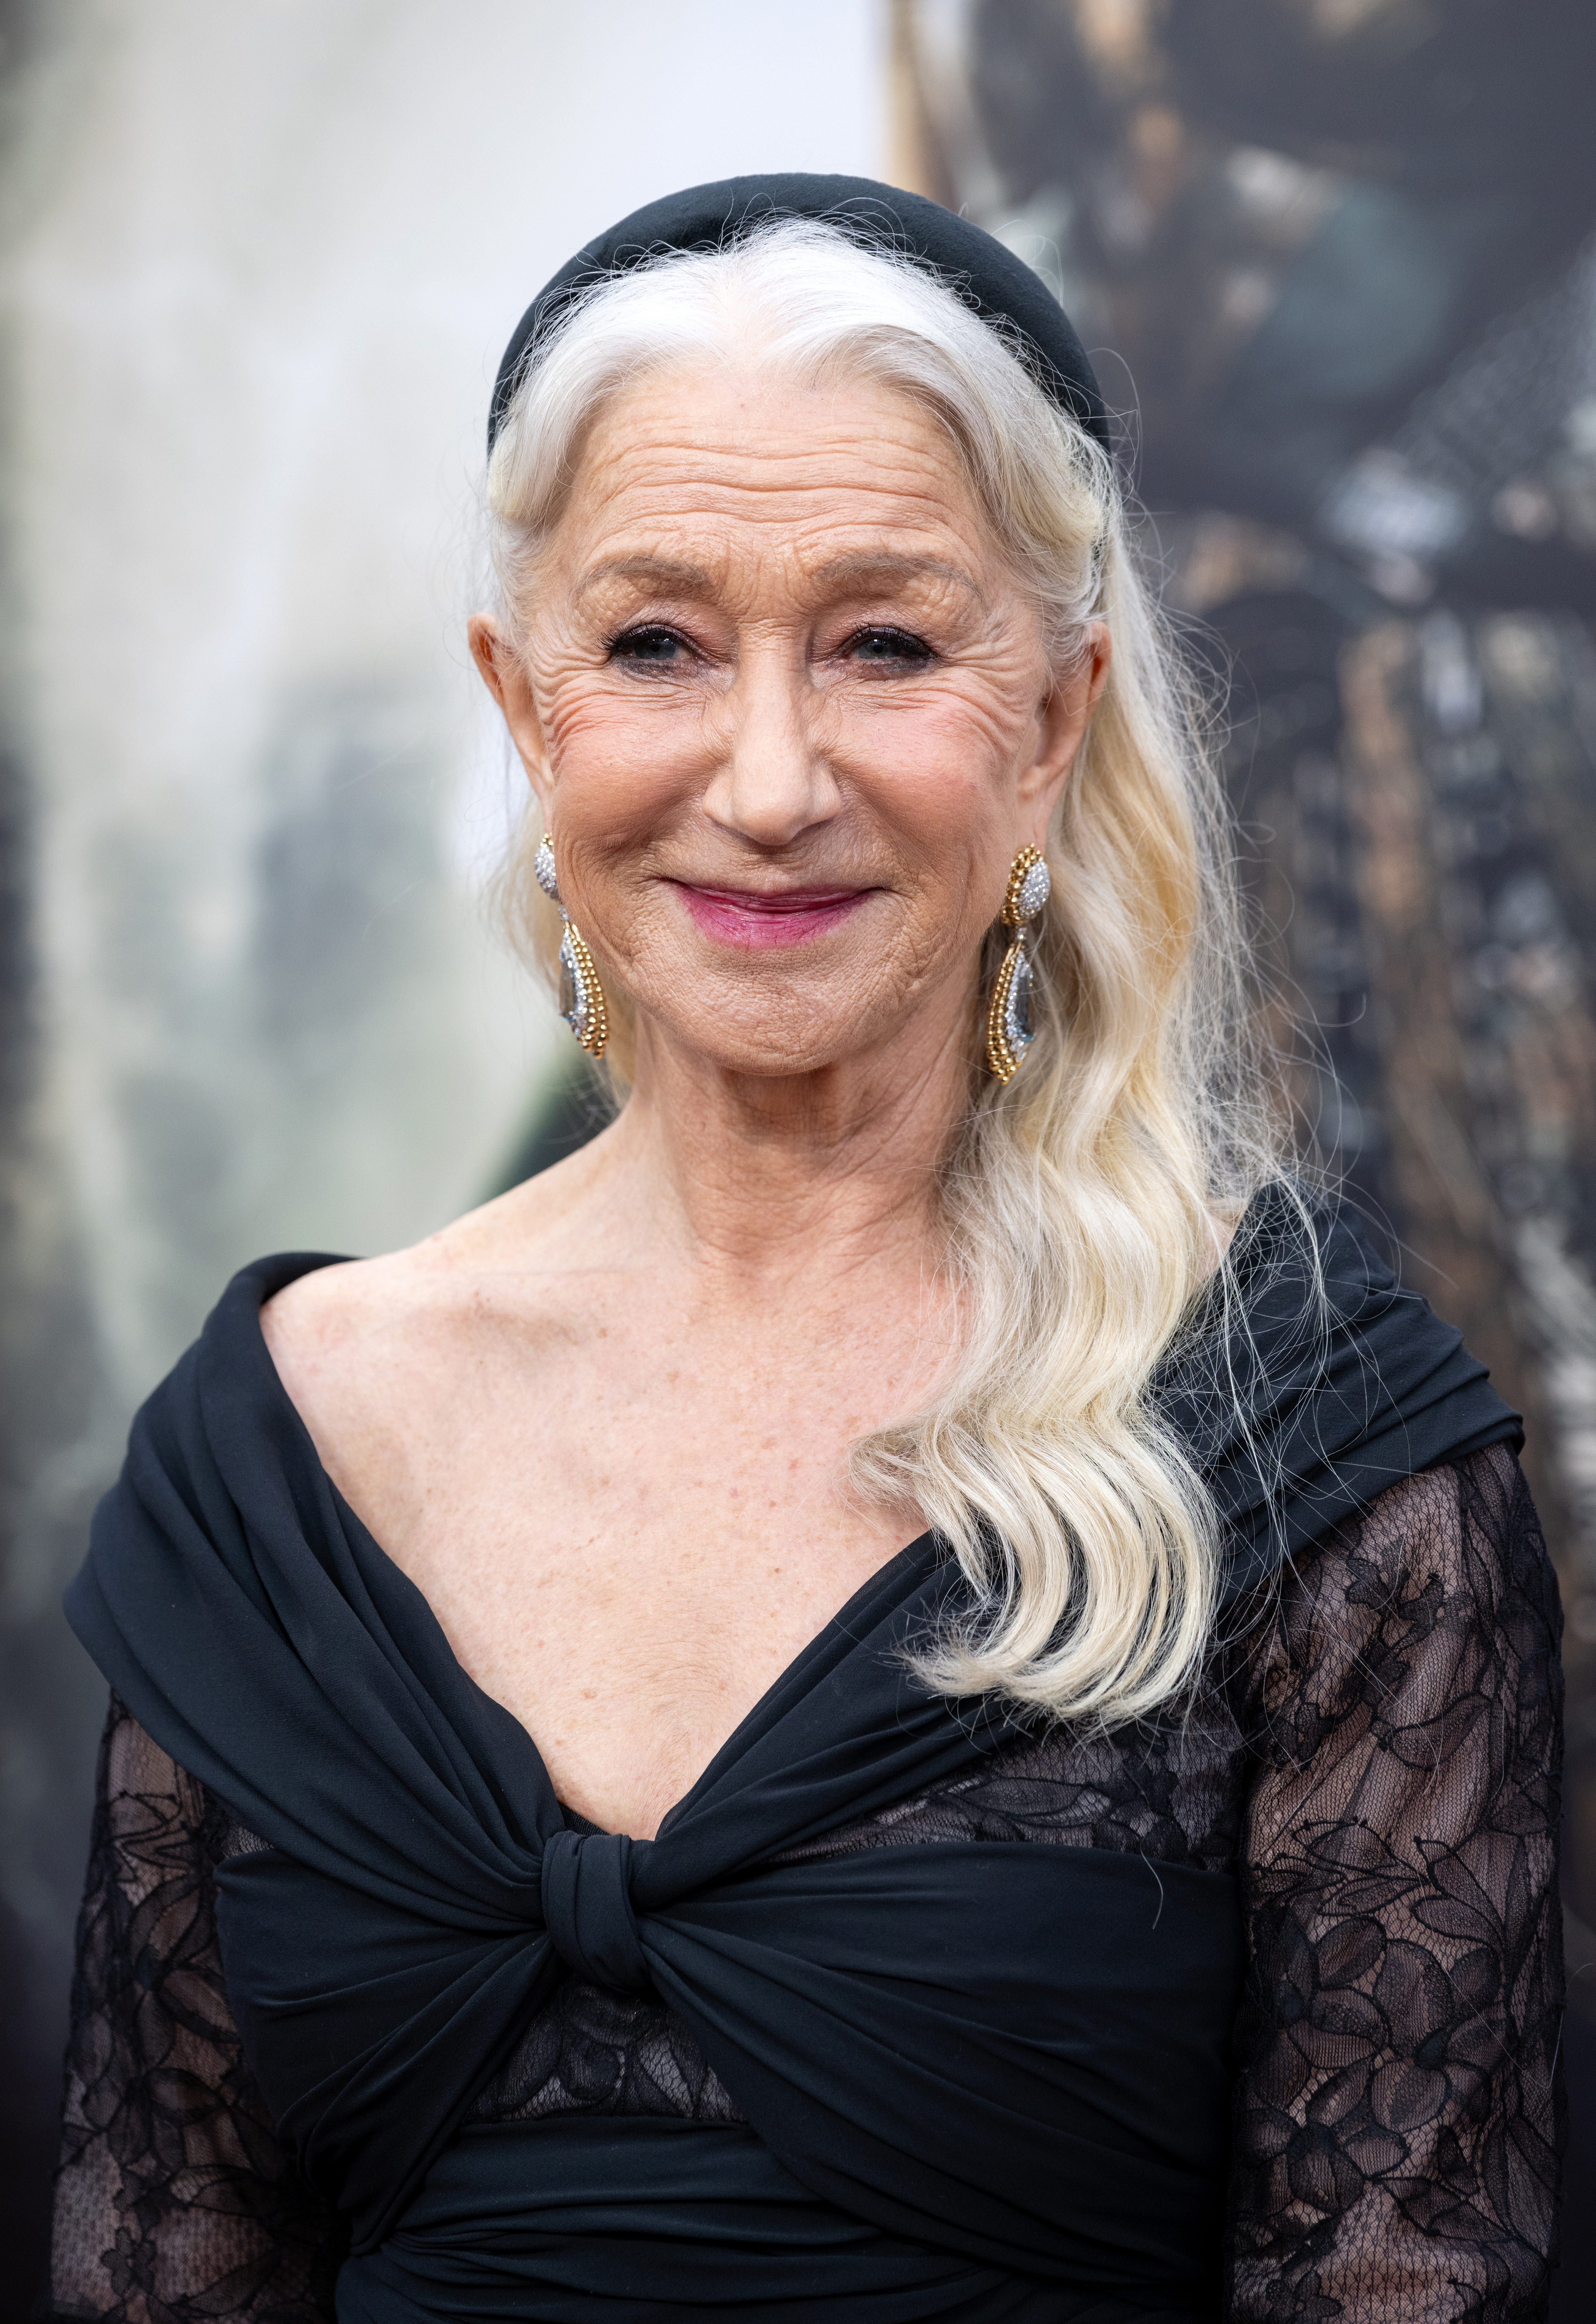 Helen Mirren attends the Los Angeles Premiere of Warner Bros.' "Shazam! Fury Of The Gods" at the Regency Village Theatre in Los Angeles, California, on March 14, 2023. | Source: Getty Images